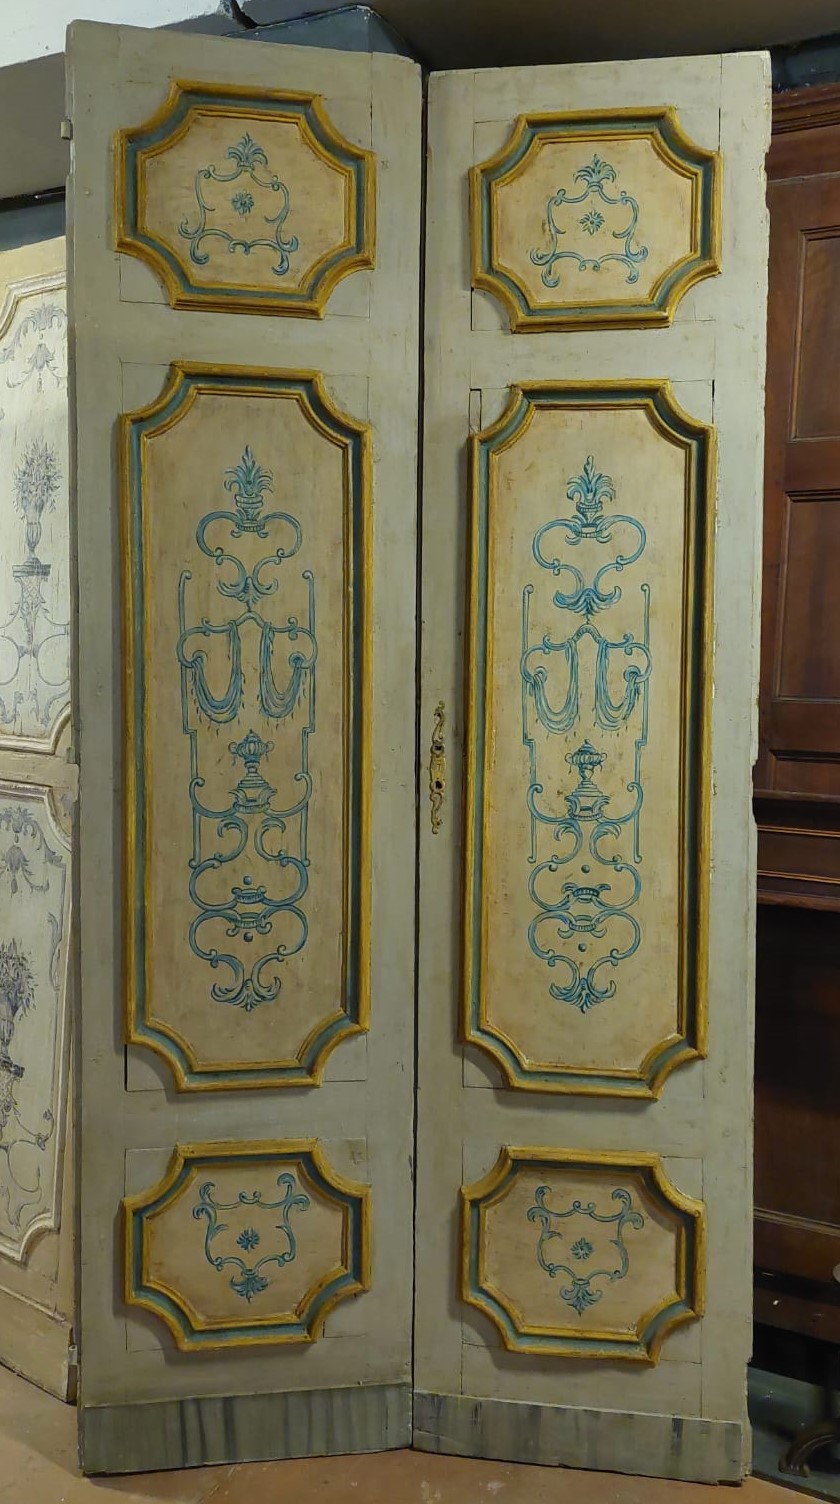 A pts787 - n. 3 lacquered doors, 18th century, meas. max cm W 124 x H 251